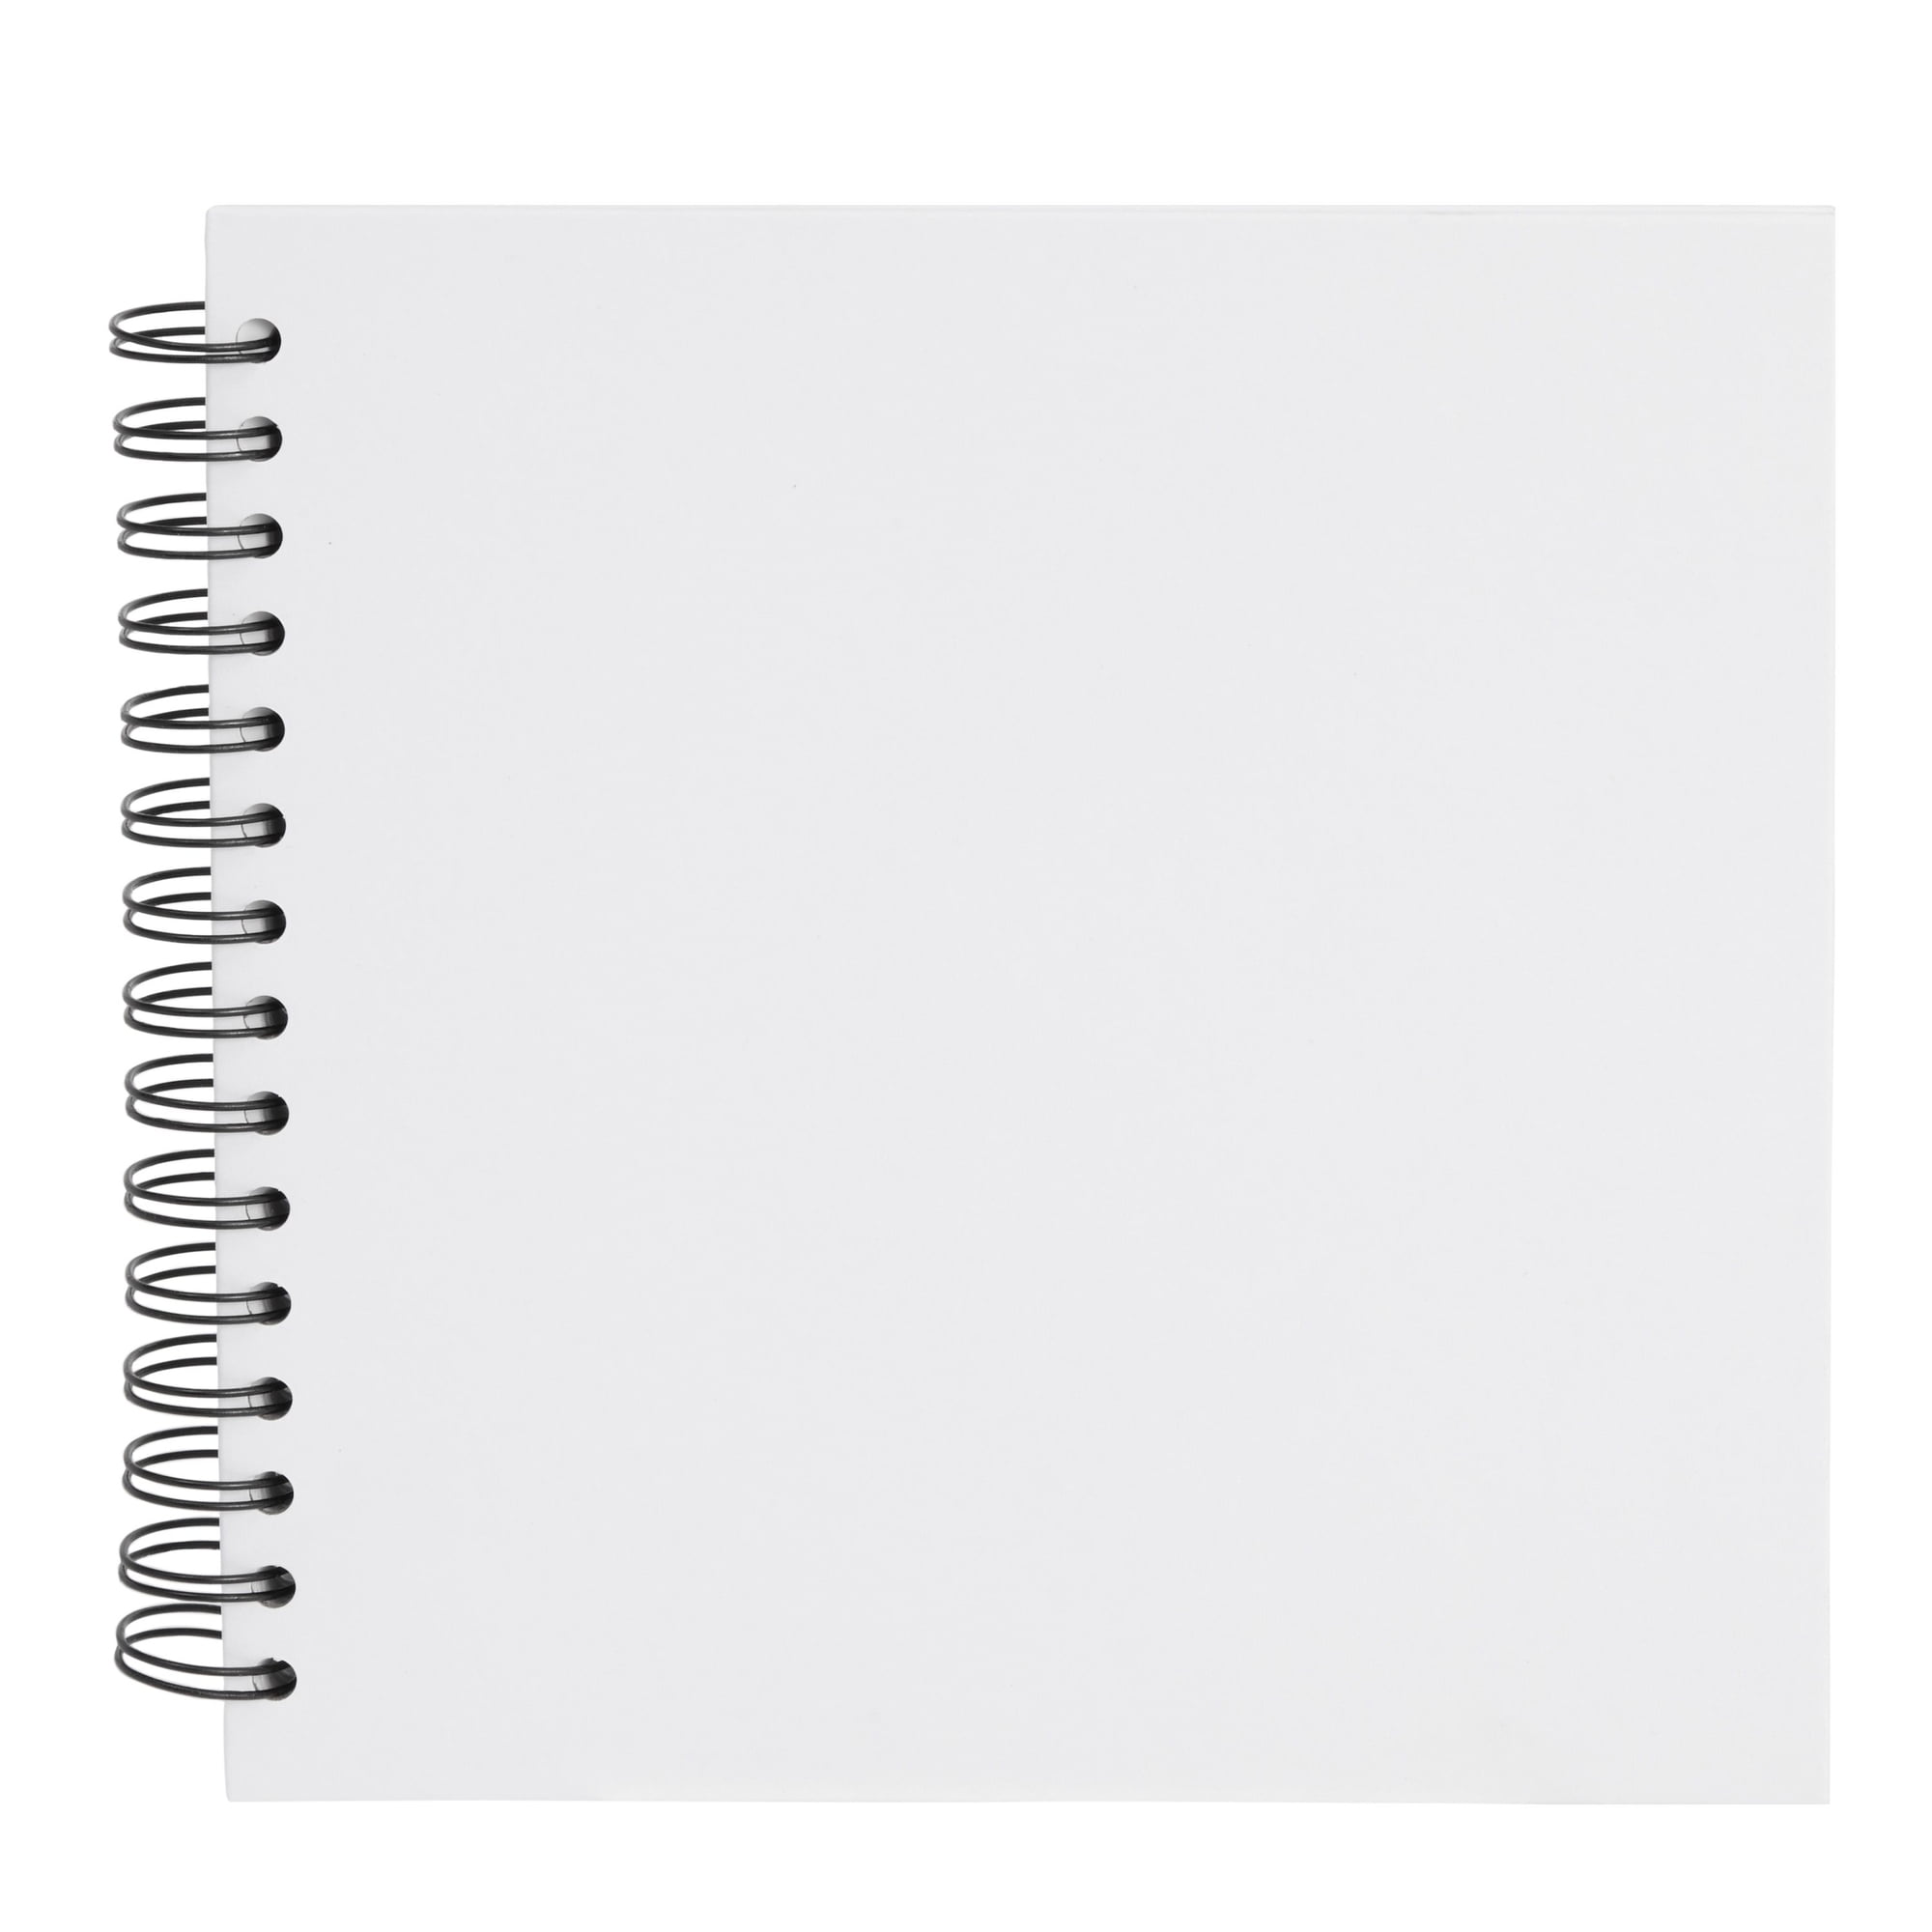  [2 Pack]Scrapbook Photo Album (8 x 8 inch) - 60 Pages